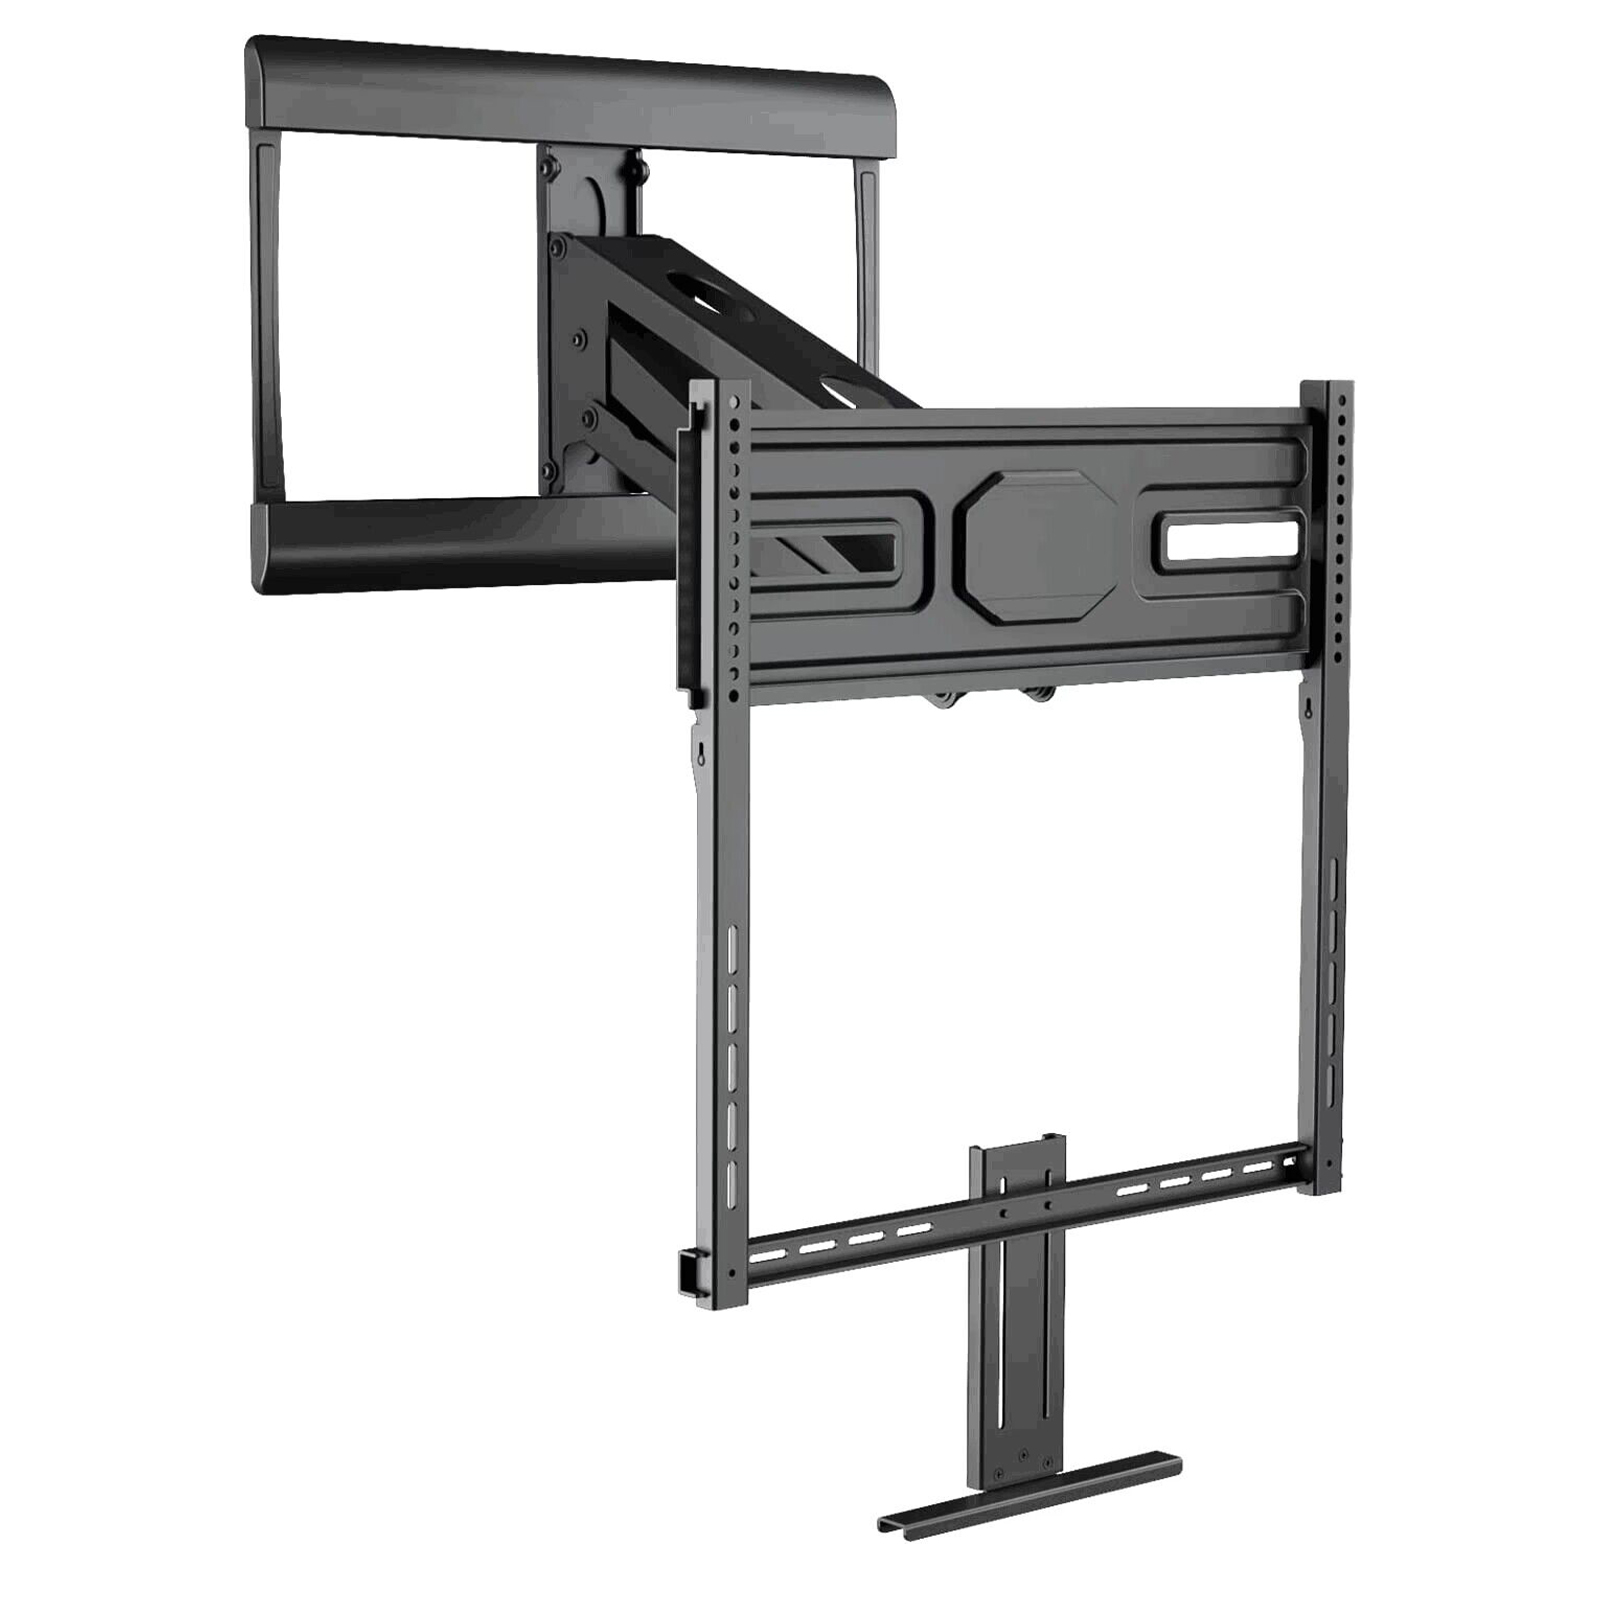 Fireplace TV Mount Above Fireplace Pull Down TV Mount for 43 to 70 Inch LCD LED TVs, Drop Down Mantel TV Mount Weight Capacity 72.6 Lbs, Max VESA 600×400, Black